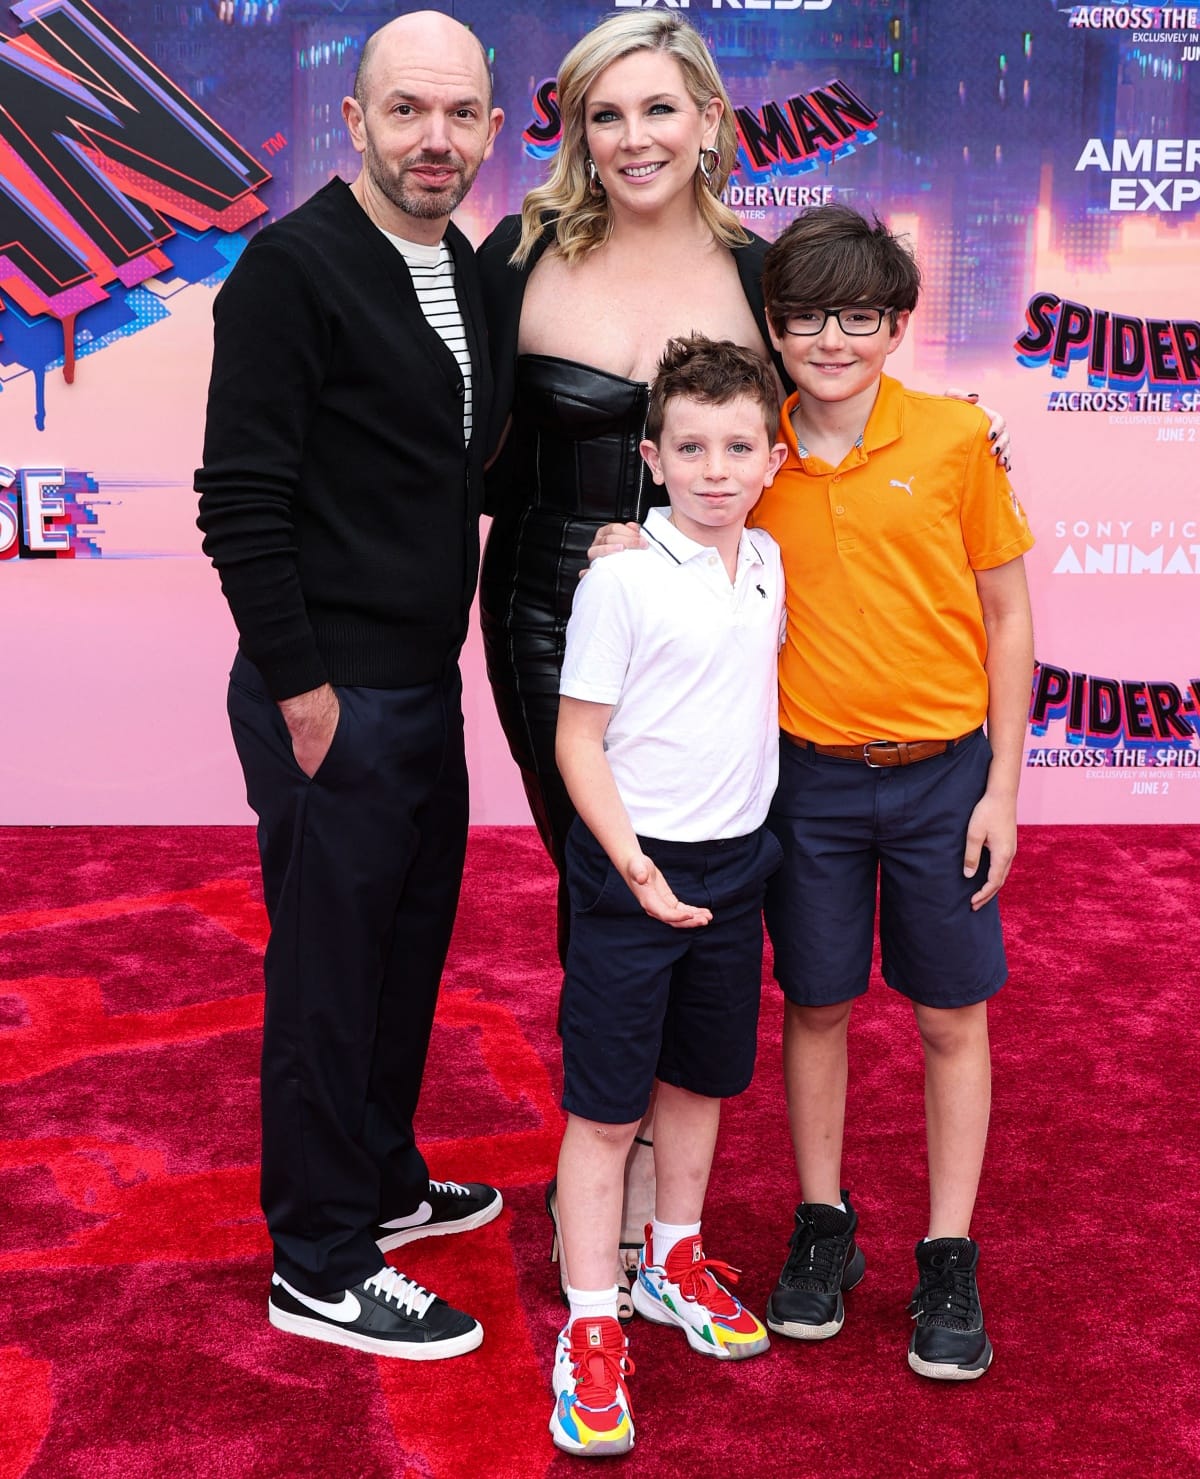 Paul Scheer and June Diane Raphael with their sons Gus and Sam at the premiere of Spider-Man: Across the Spider-Verse